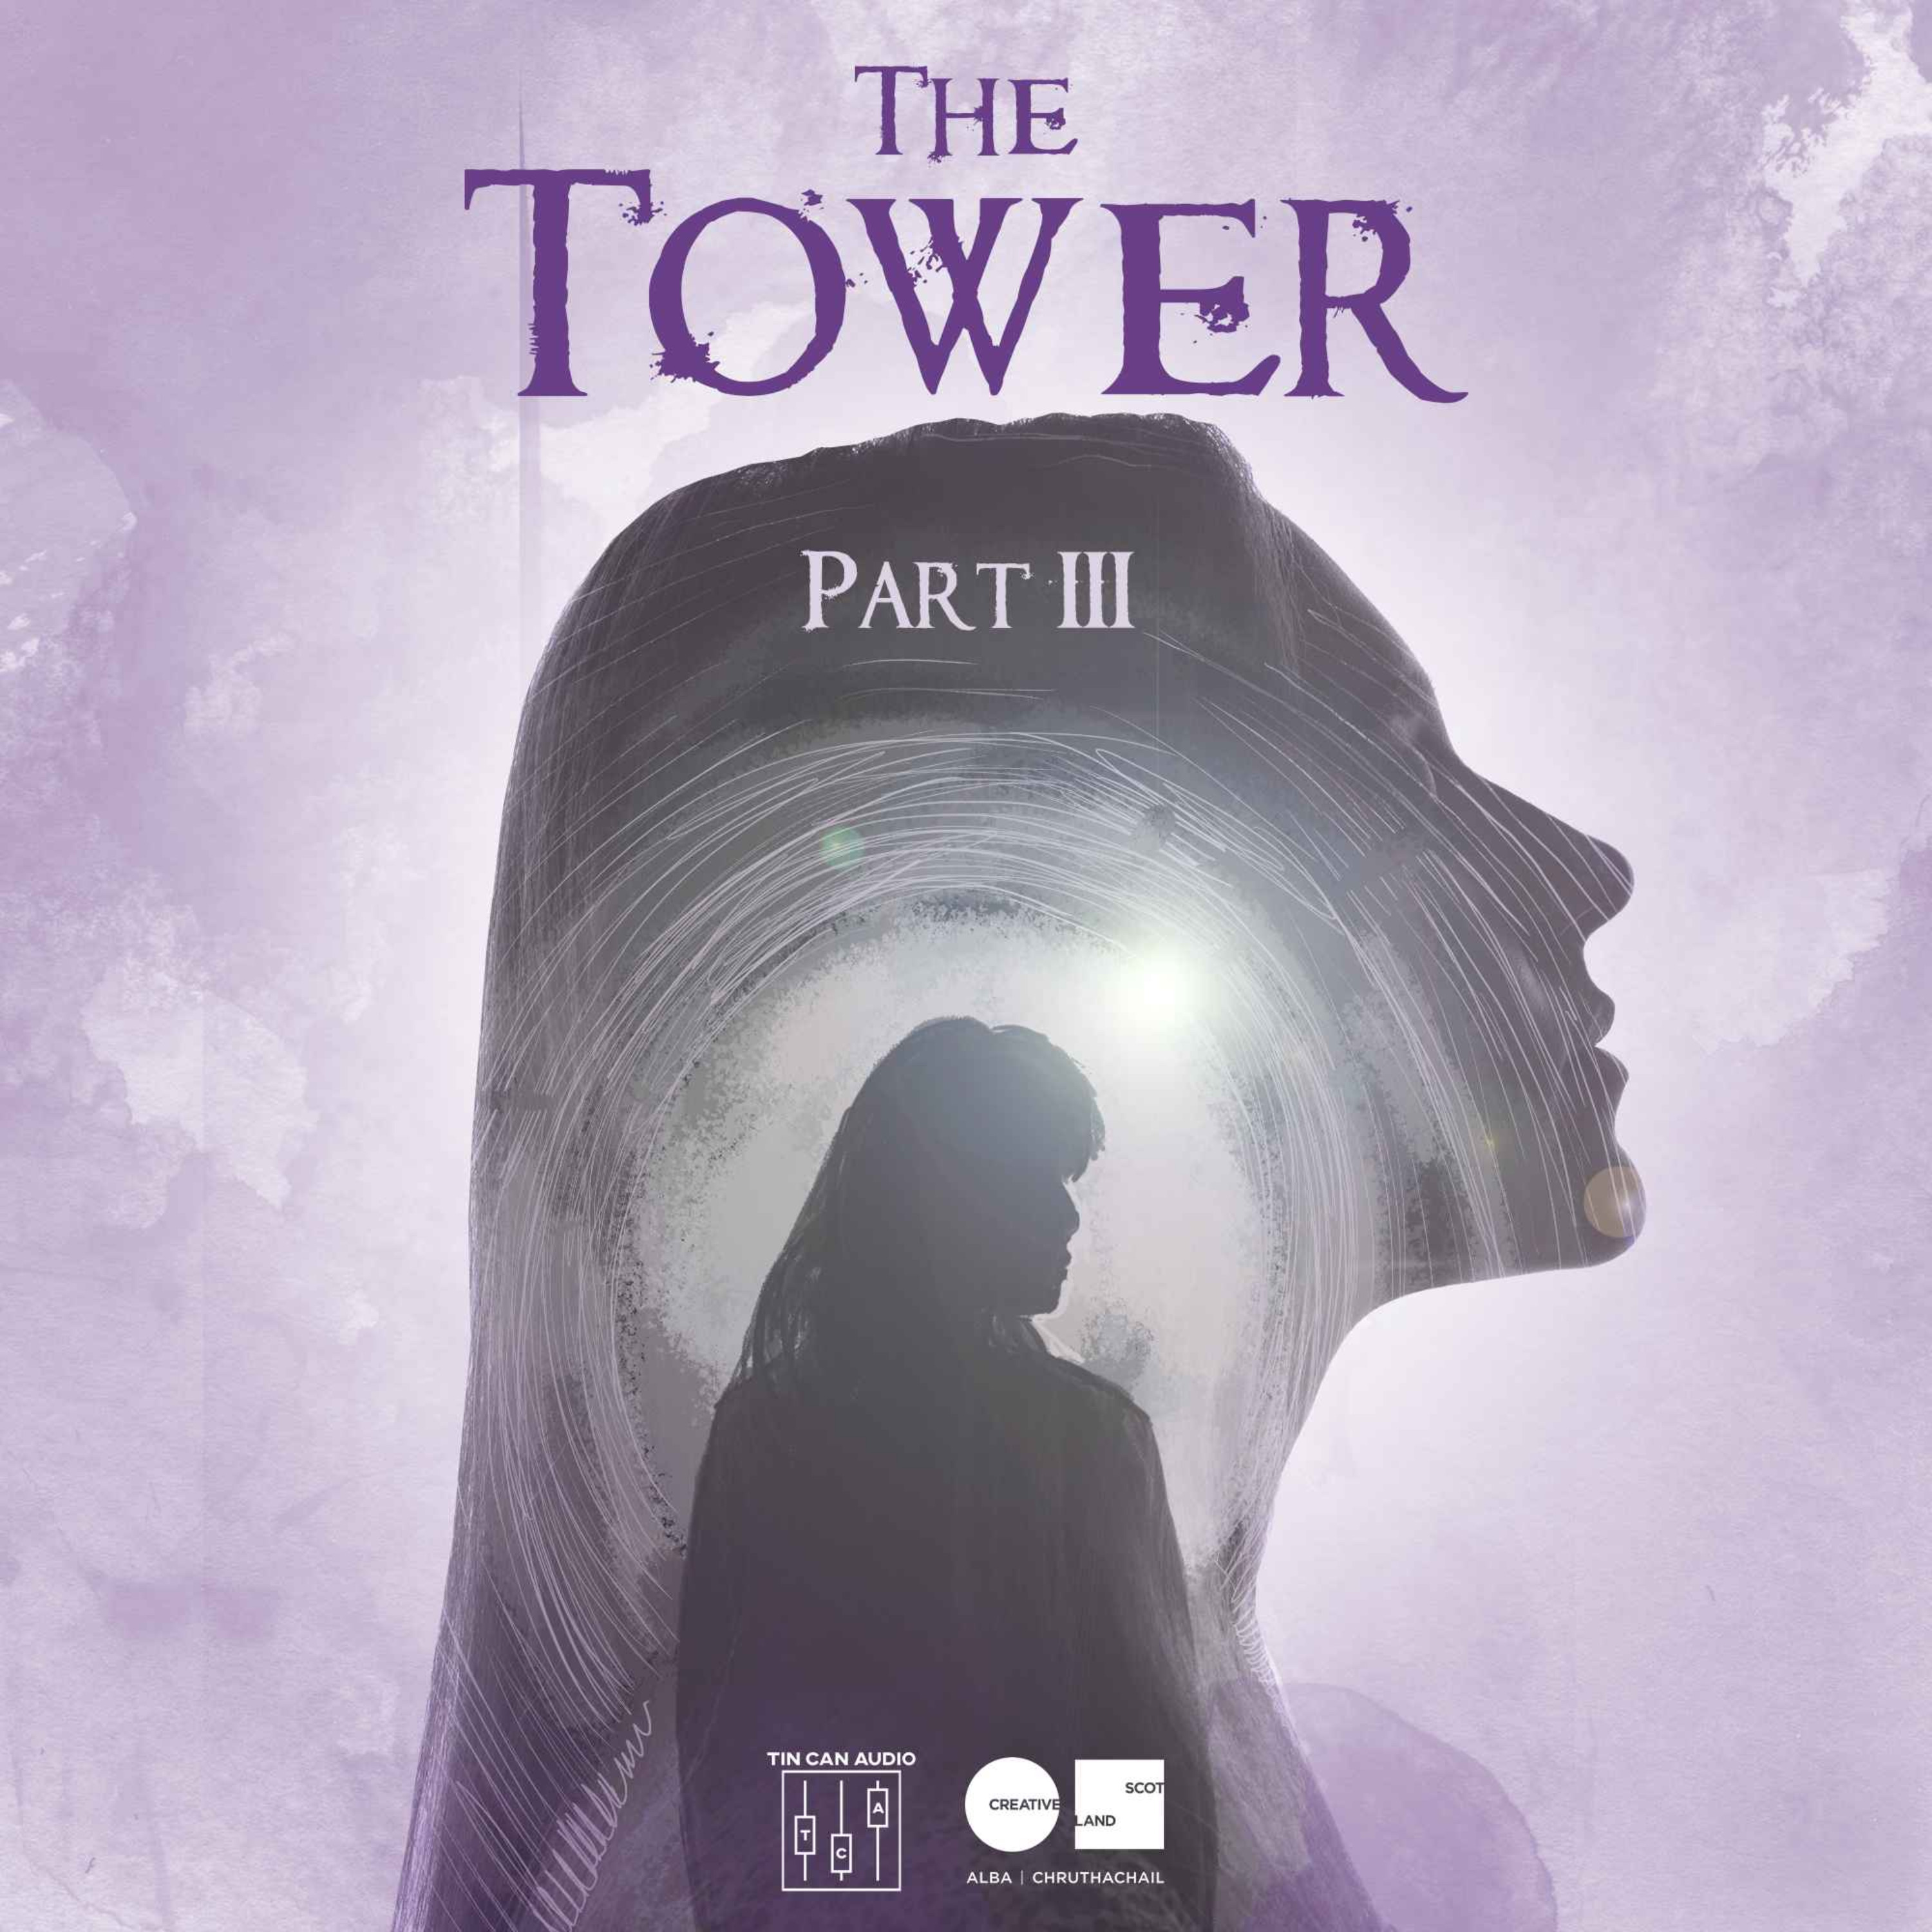 Coming Soon - The Tower Part III